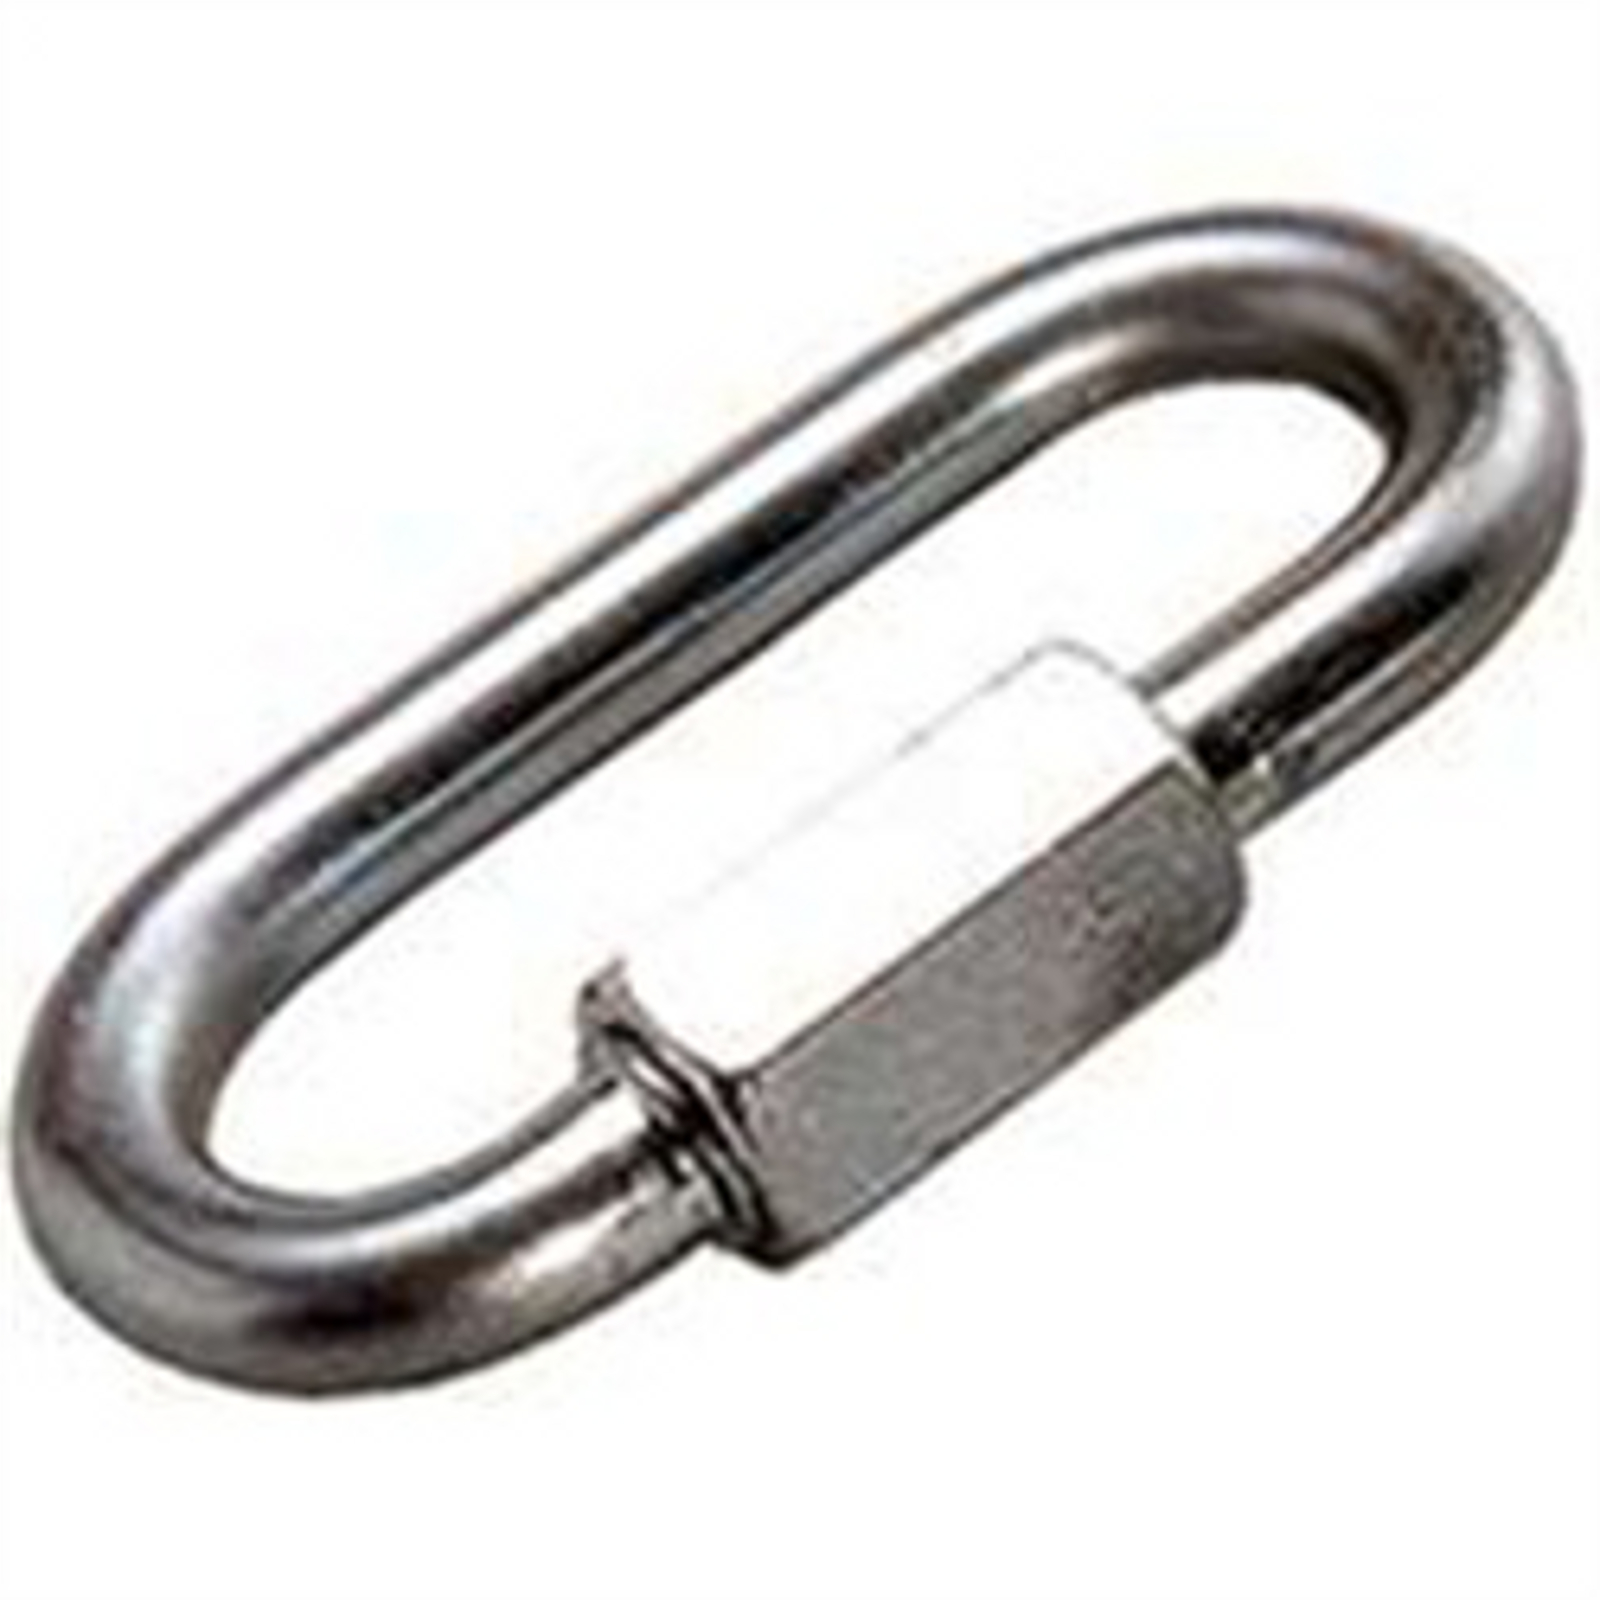 UPC 016118000474 product image for 5,000 Lb. Rating Chrome Chain Clips, Model 74602 - 2 Count, 5/16 | upcitemdb.com